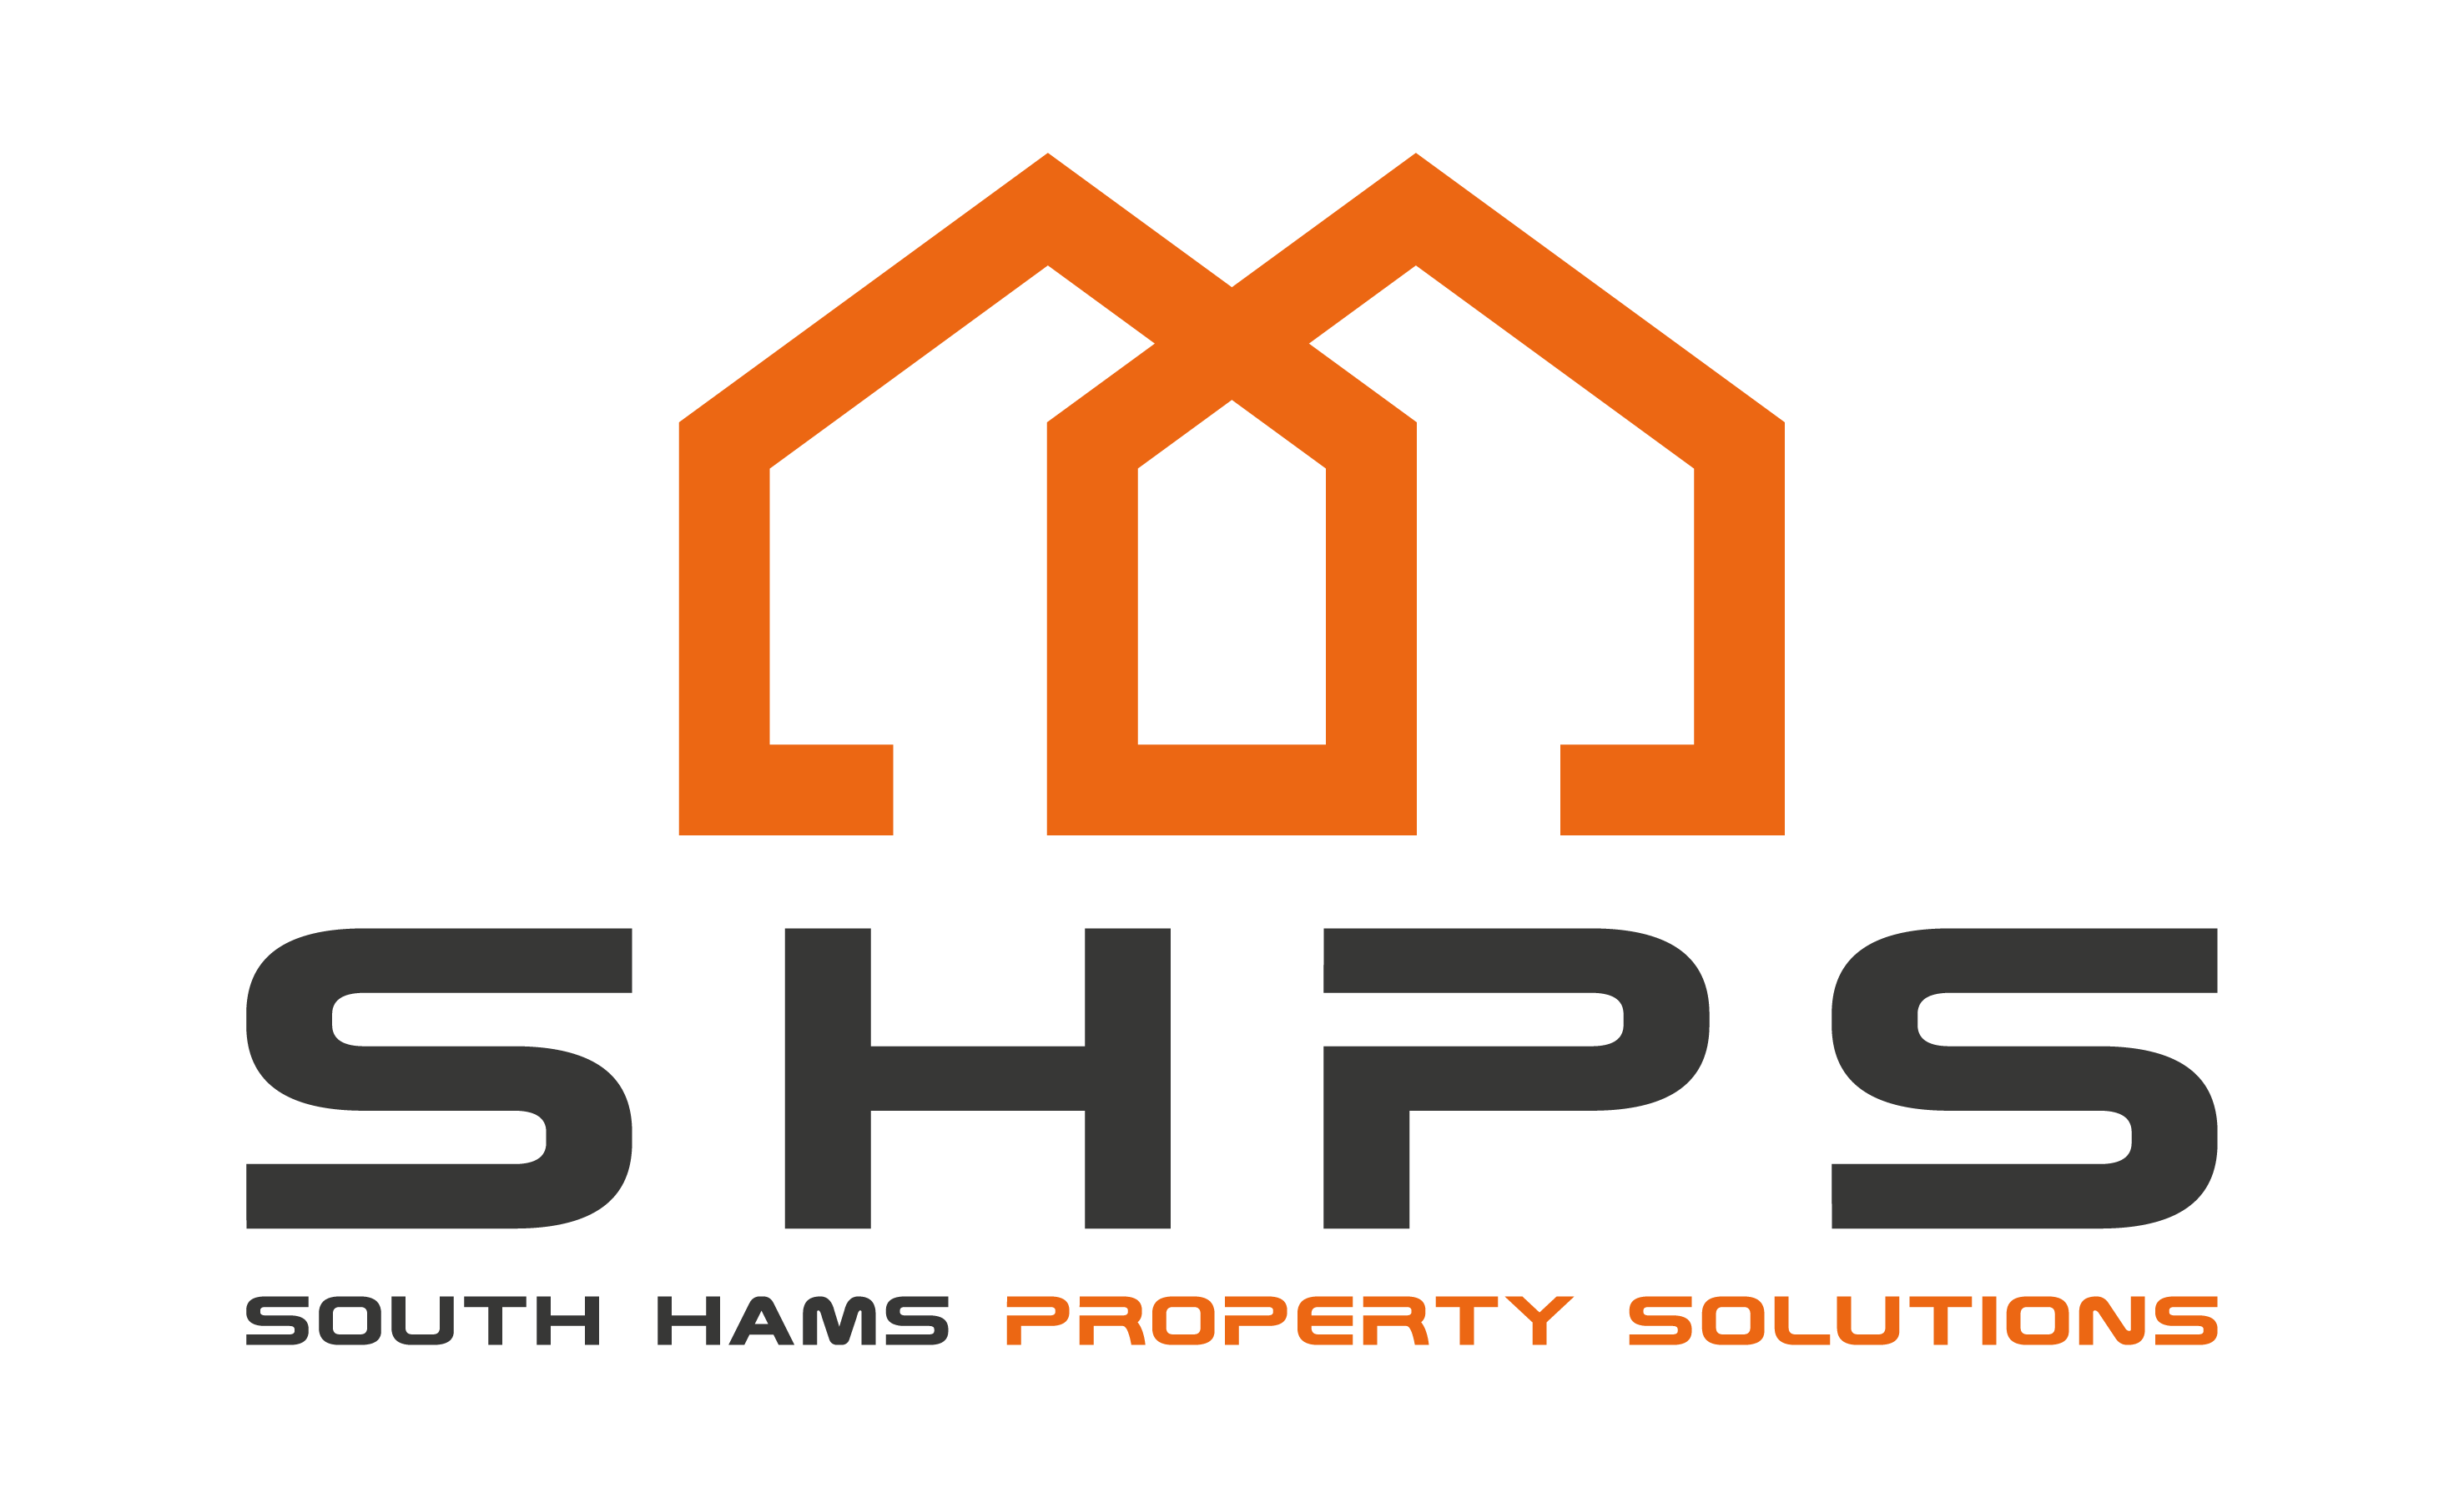 South Hams Property Solutions